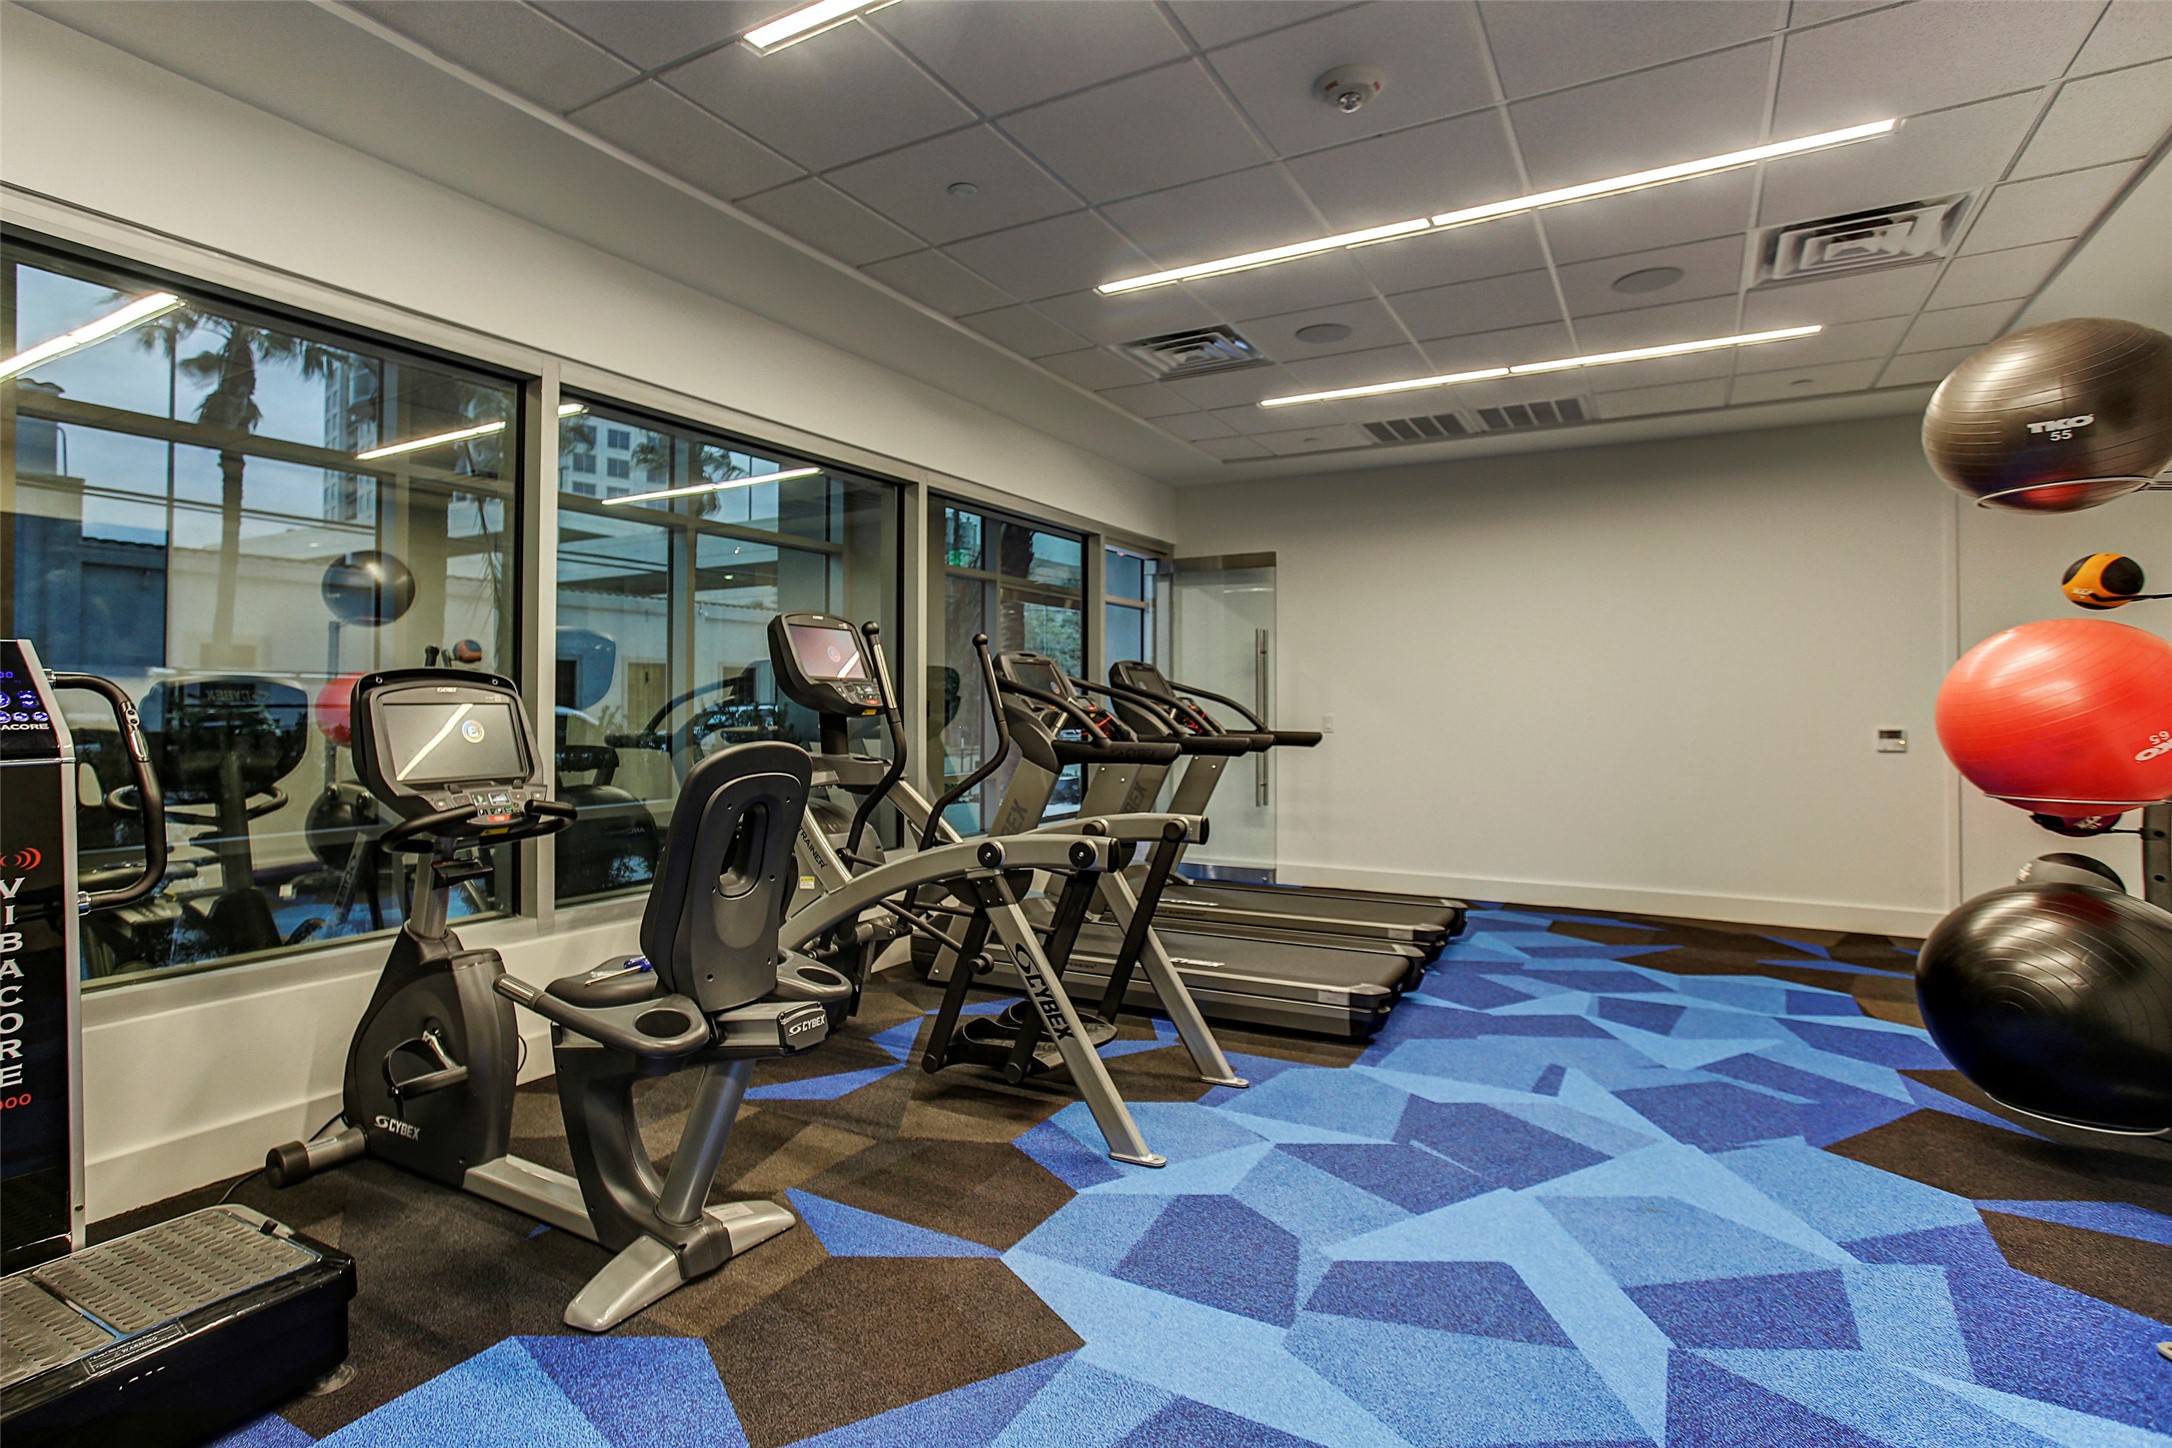 Open 24/7 the gym is available to all residents.